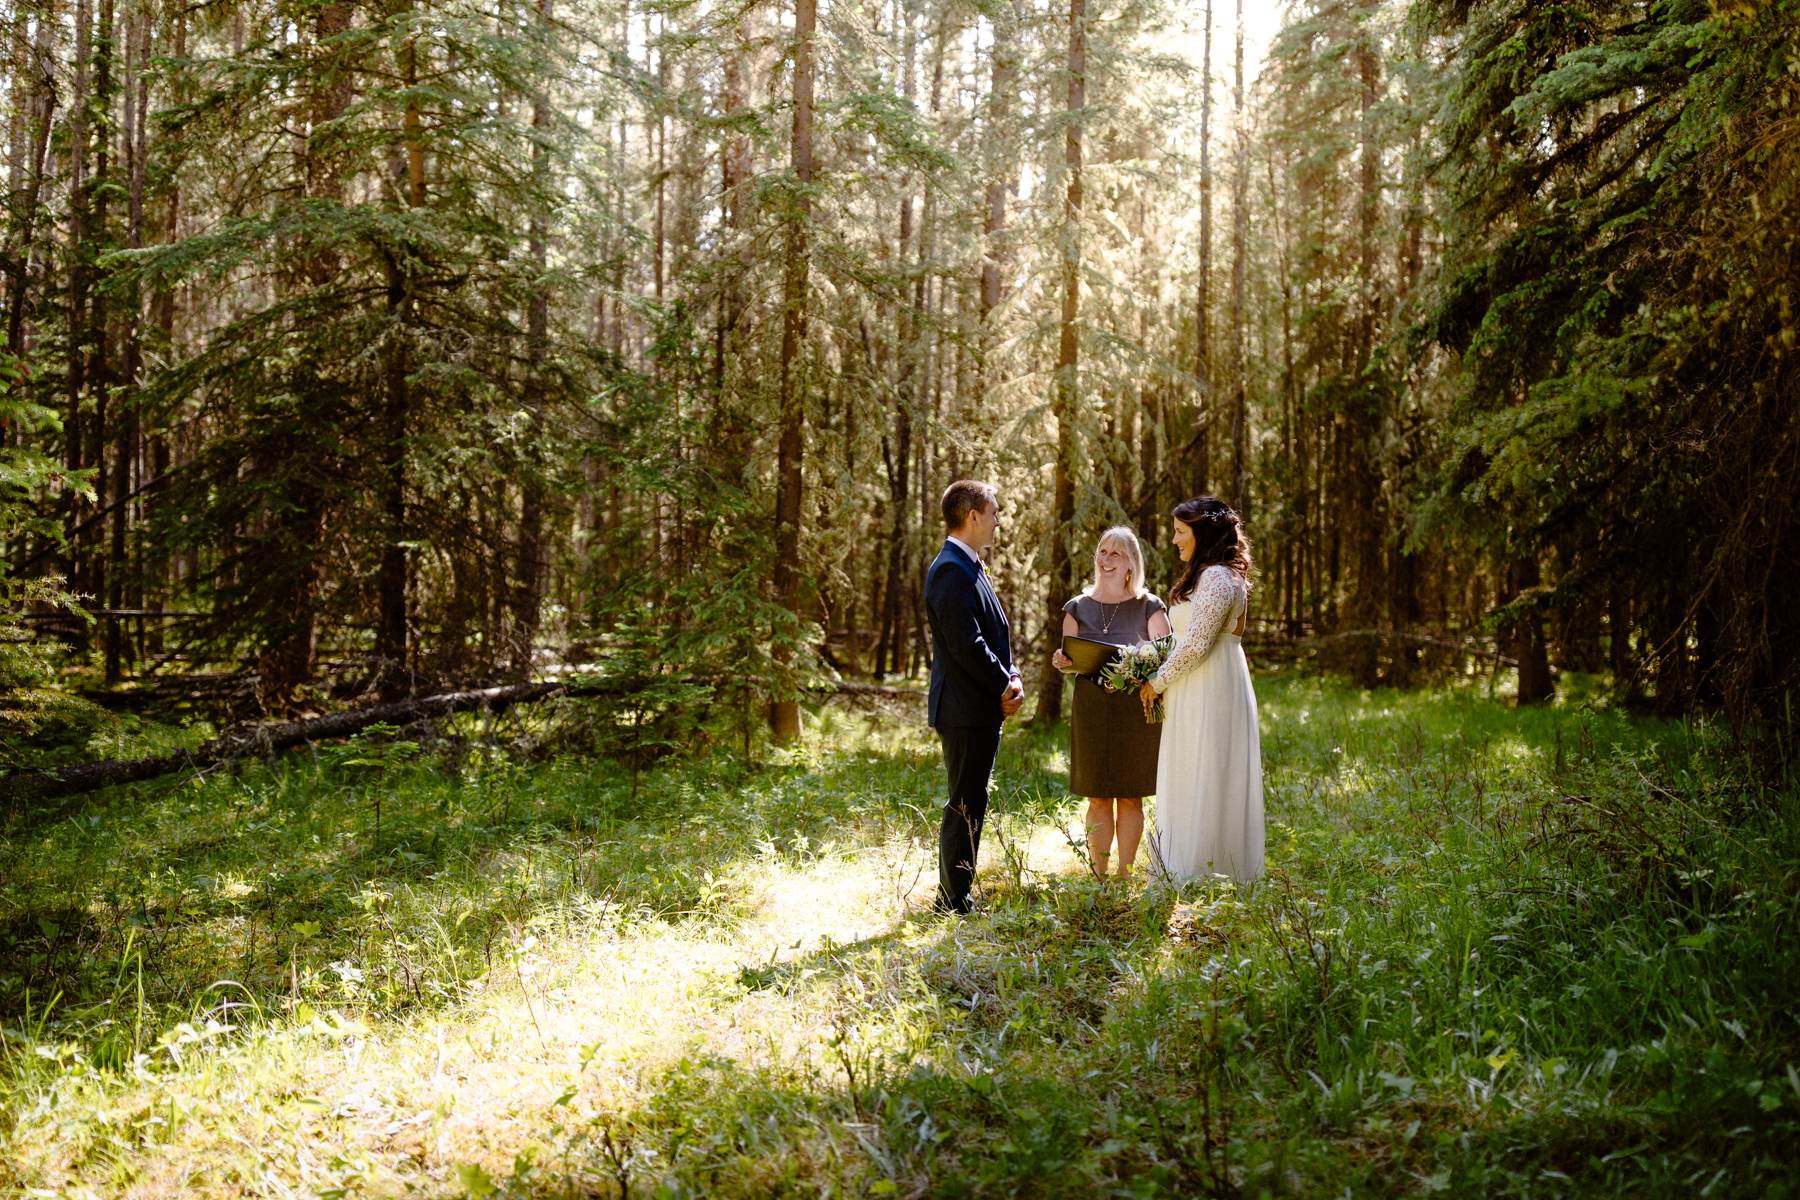 Vow Renewal Photography in Banff - Image 4